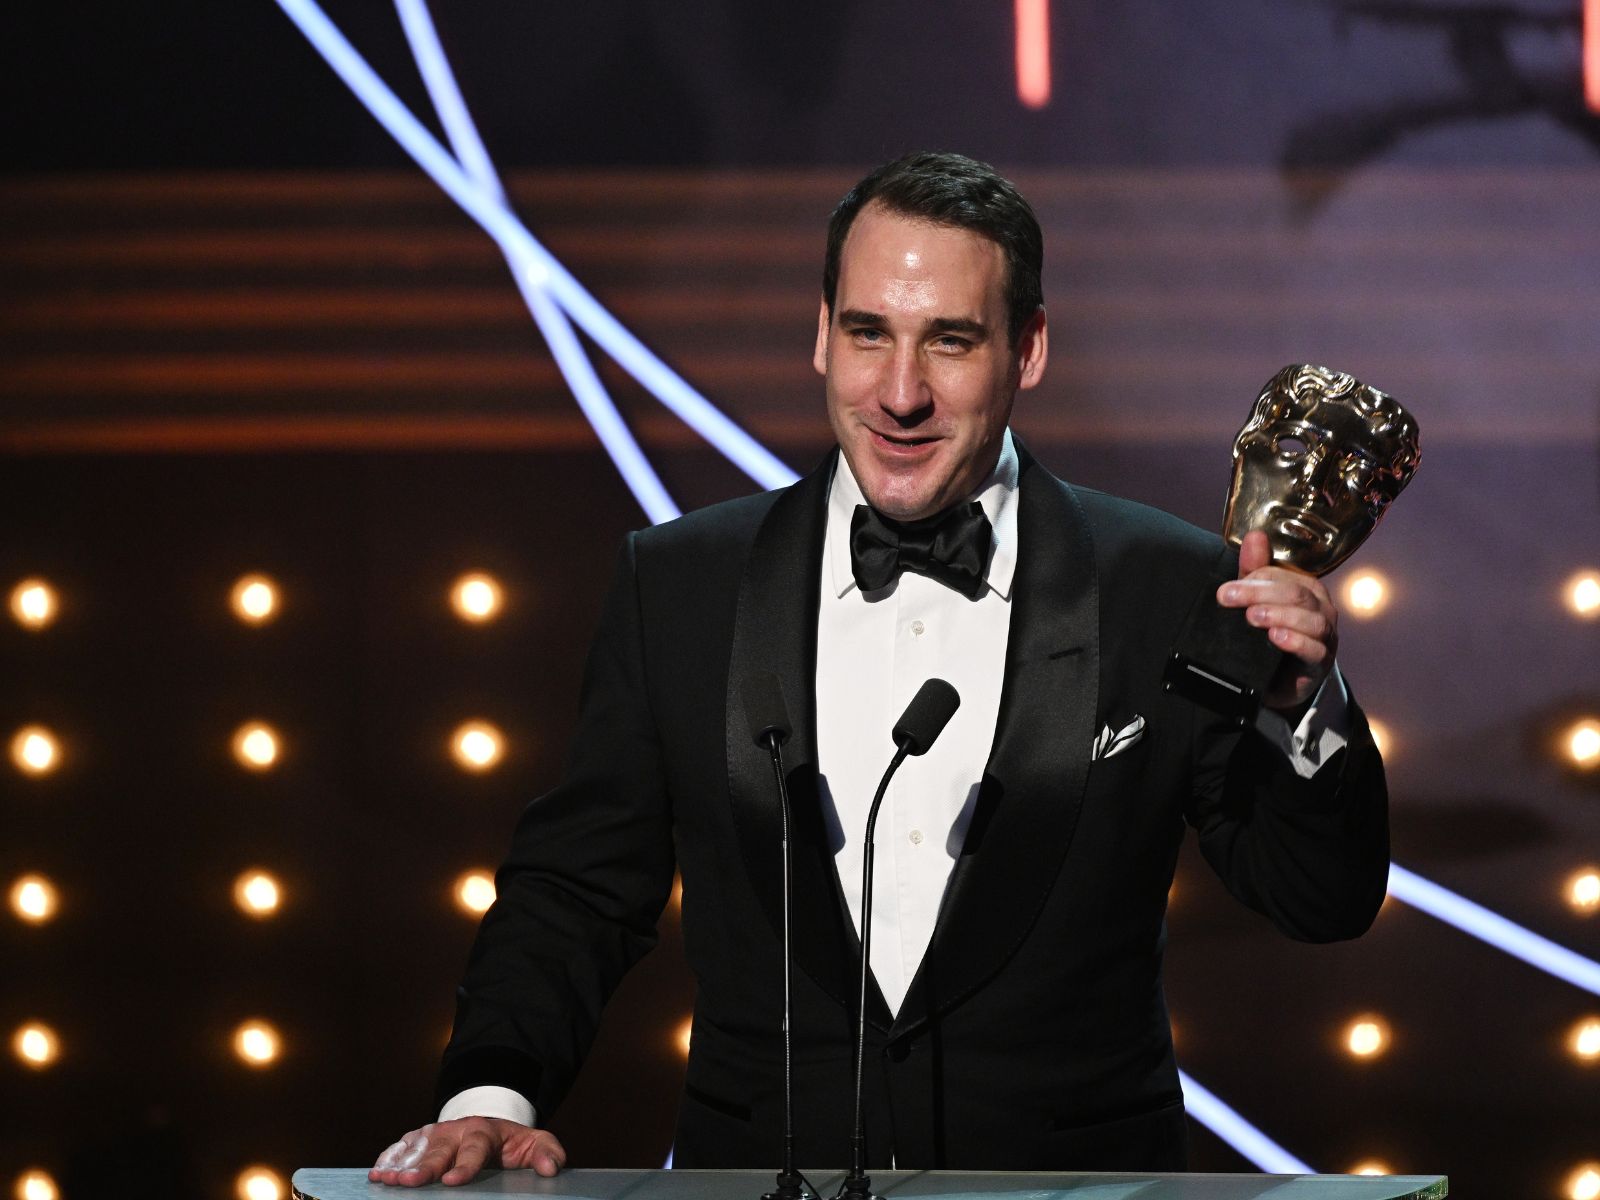 Bafta Games Awards 2021: Nominees, Frontrunners, And How You Can